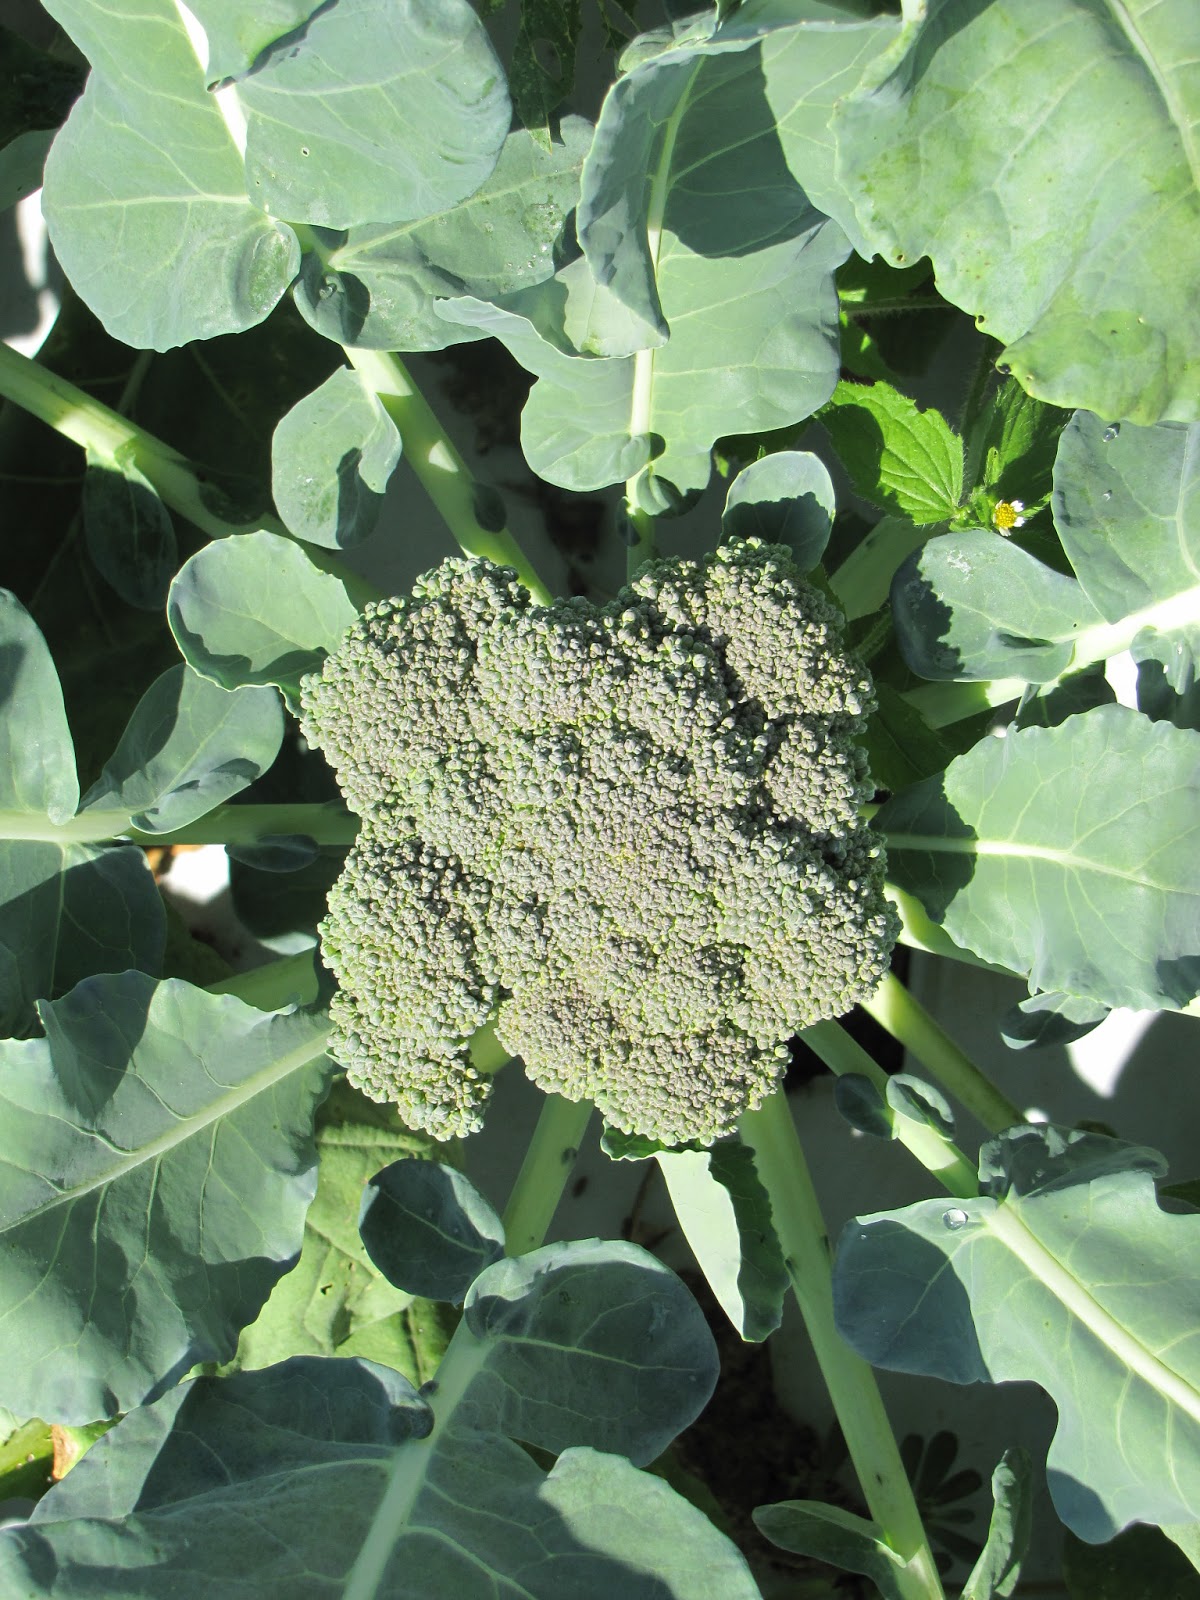 Packman broccoli grown in 2012